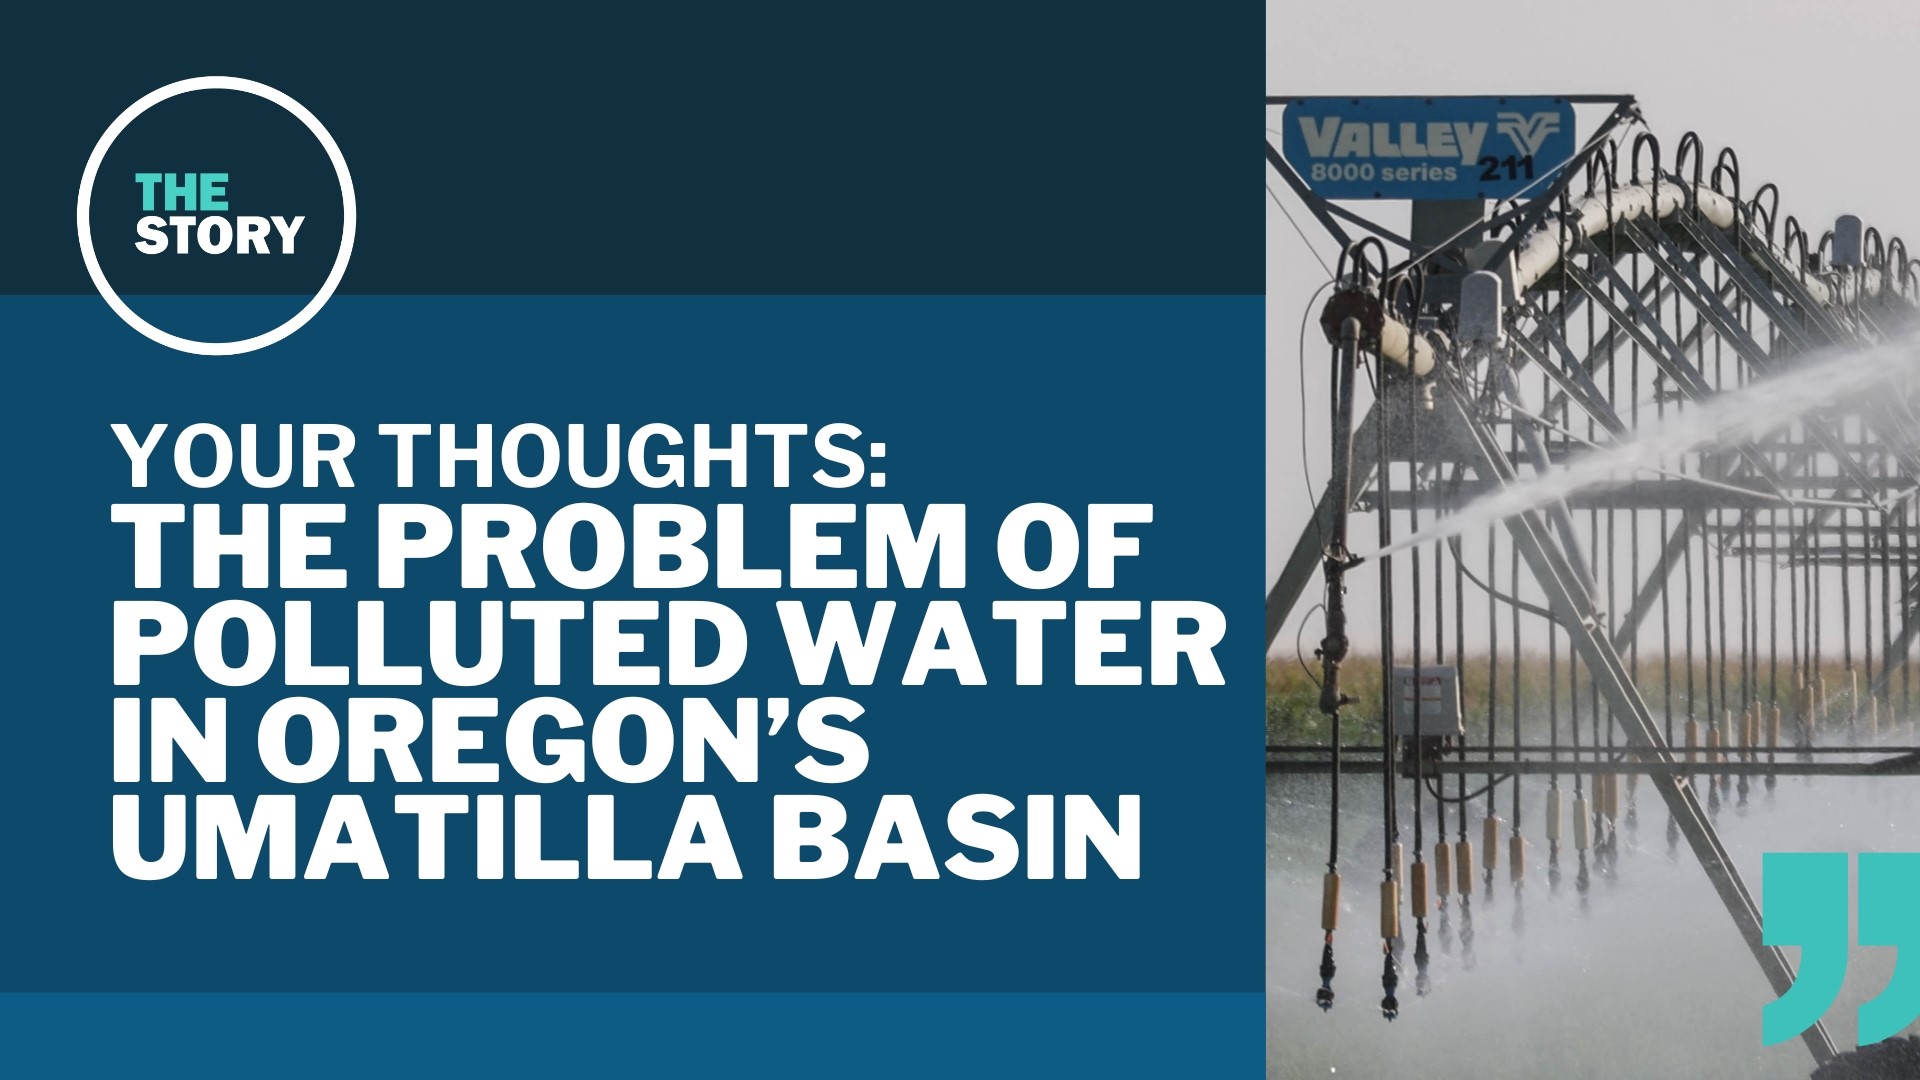 The Story wraps up its Umatilla Basin groundwater crisis coverage by tackling questions from viewers who watched the series this week.